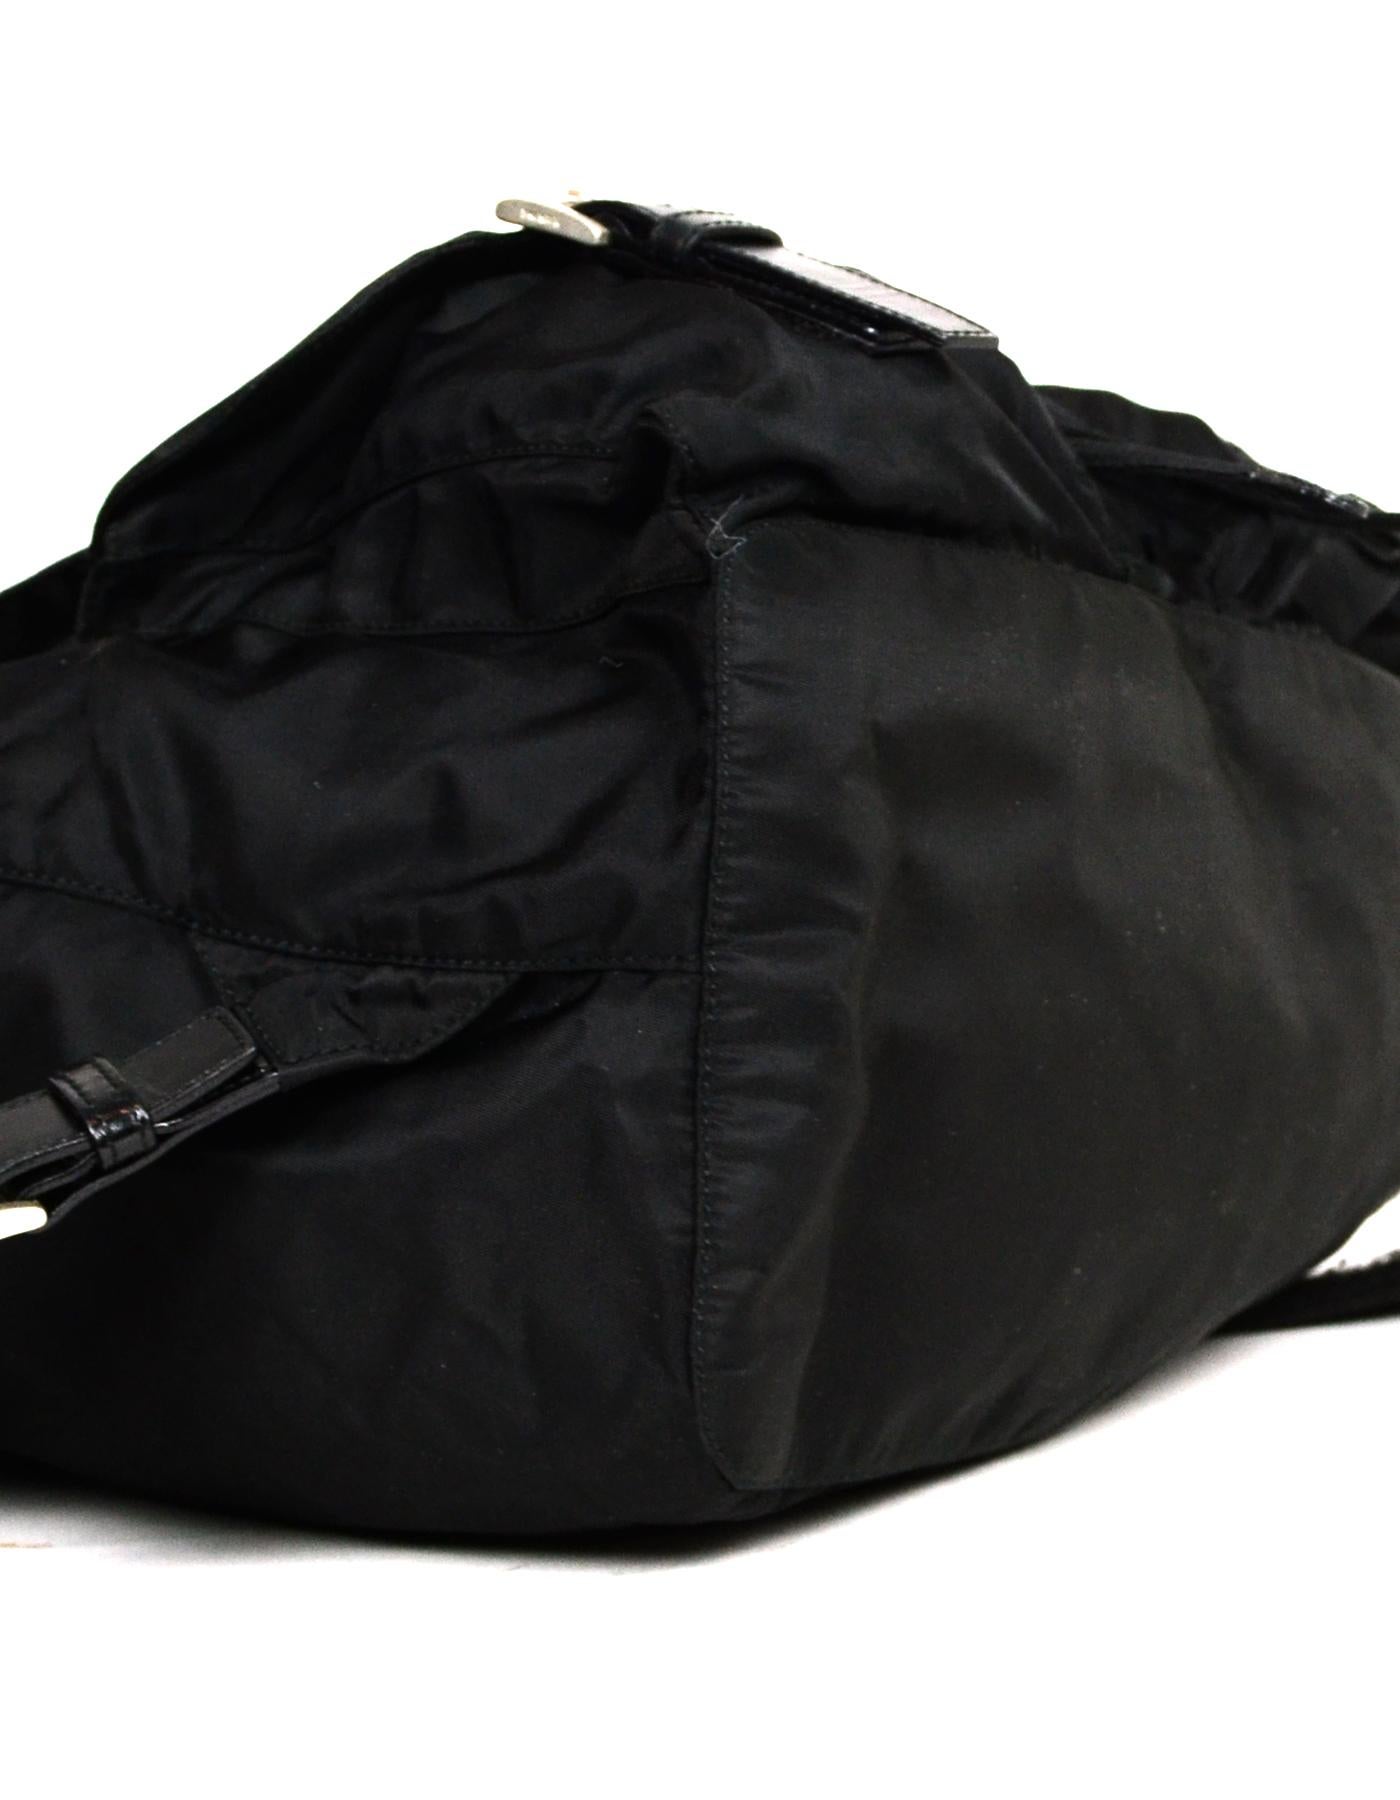 backpacks with front buckle